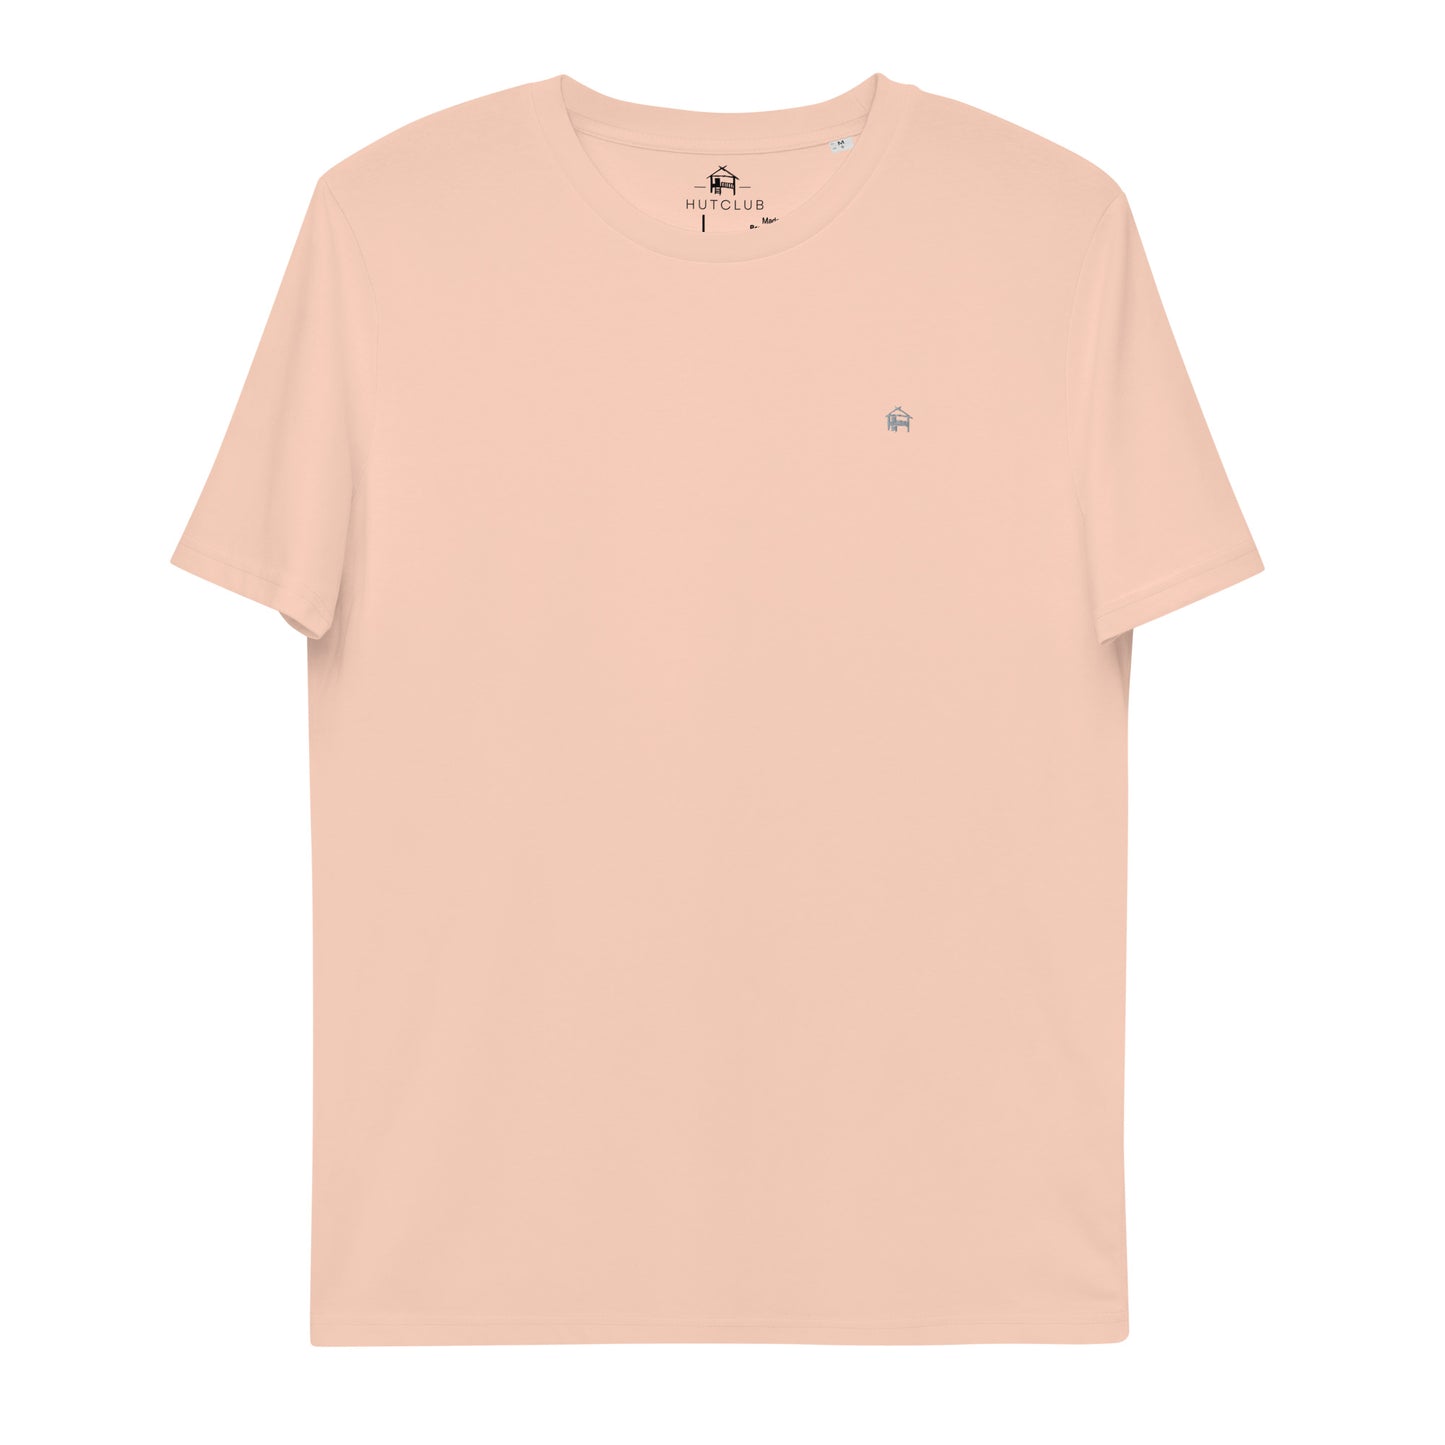 Voyager Tee